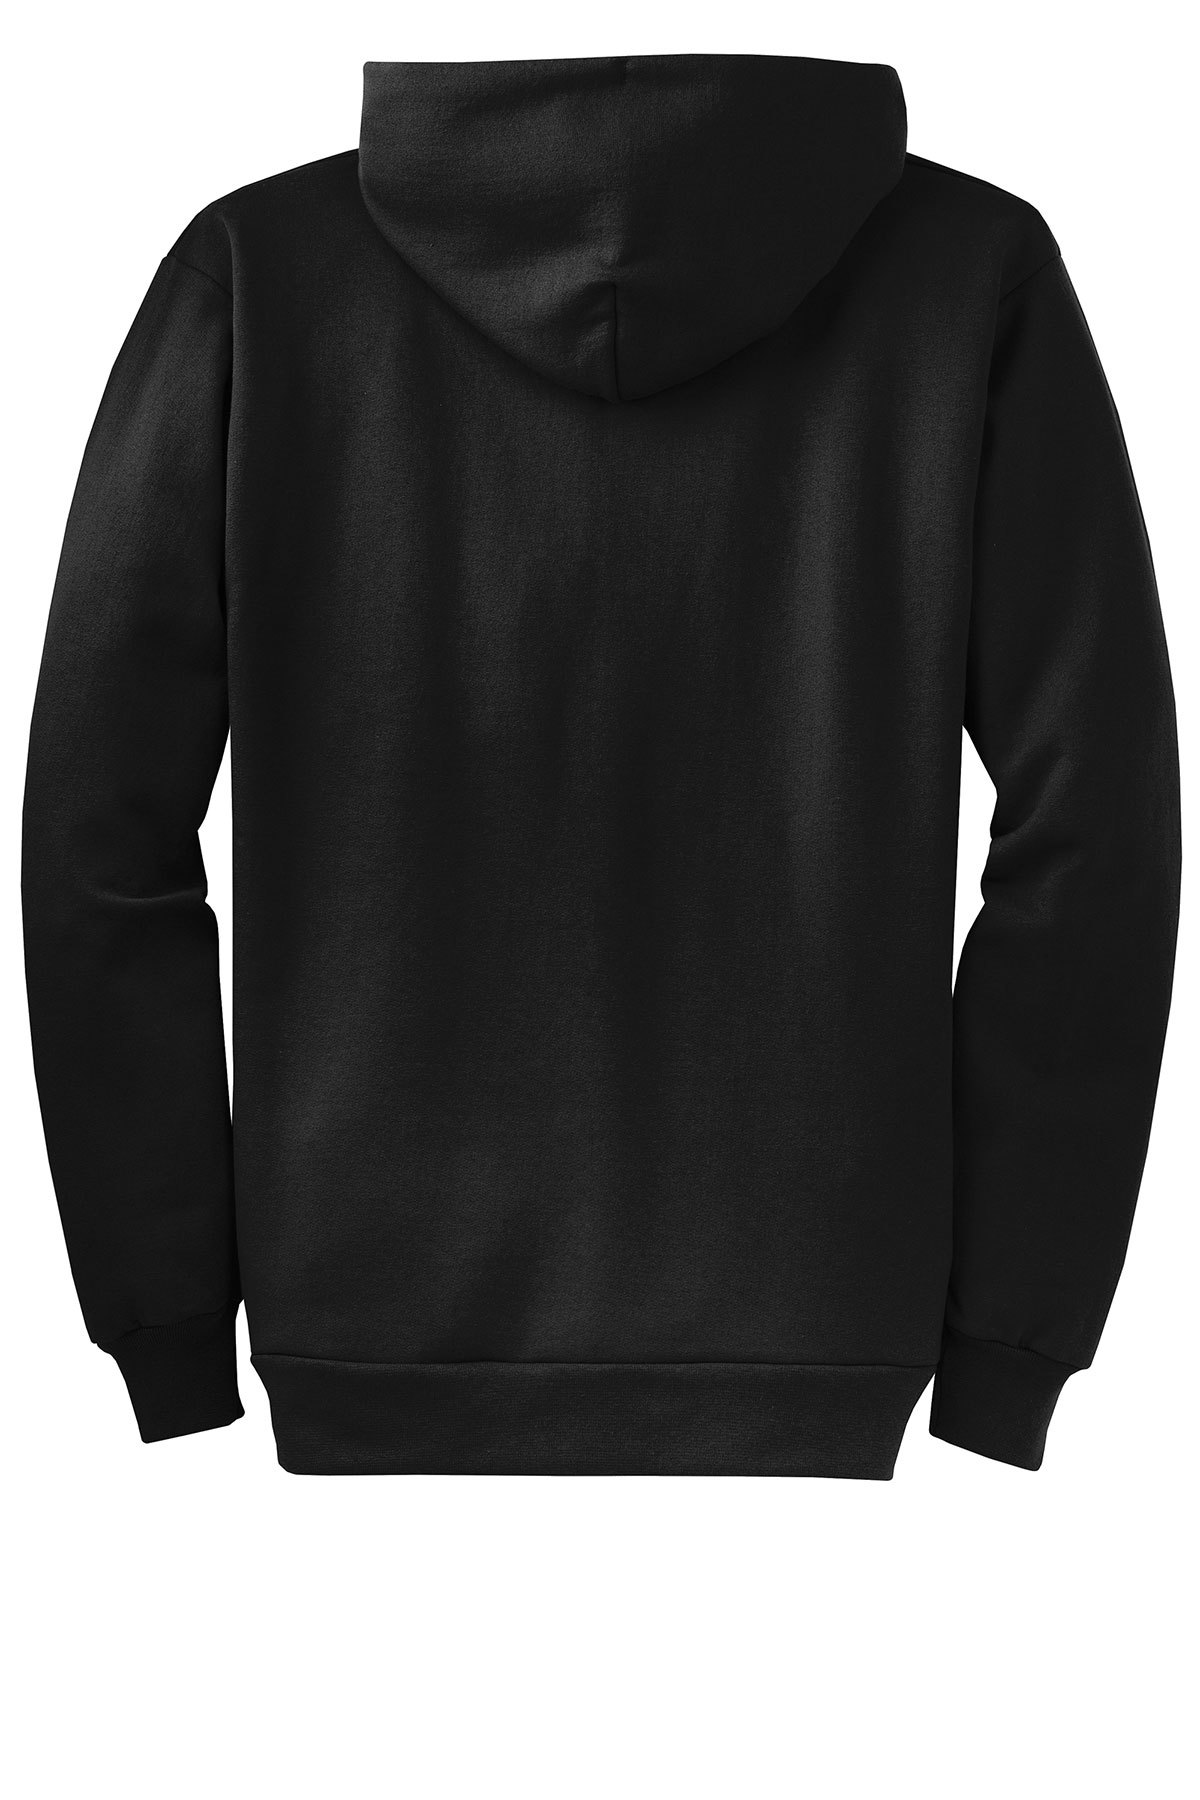 The BMW Store - Port & Company Core Fleece Pullover Hooded Sweatshirt White - Black BMW FC - DTF